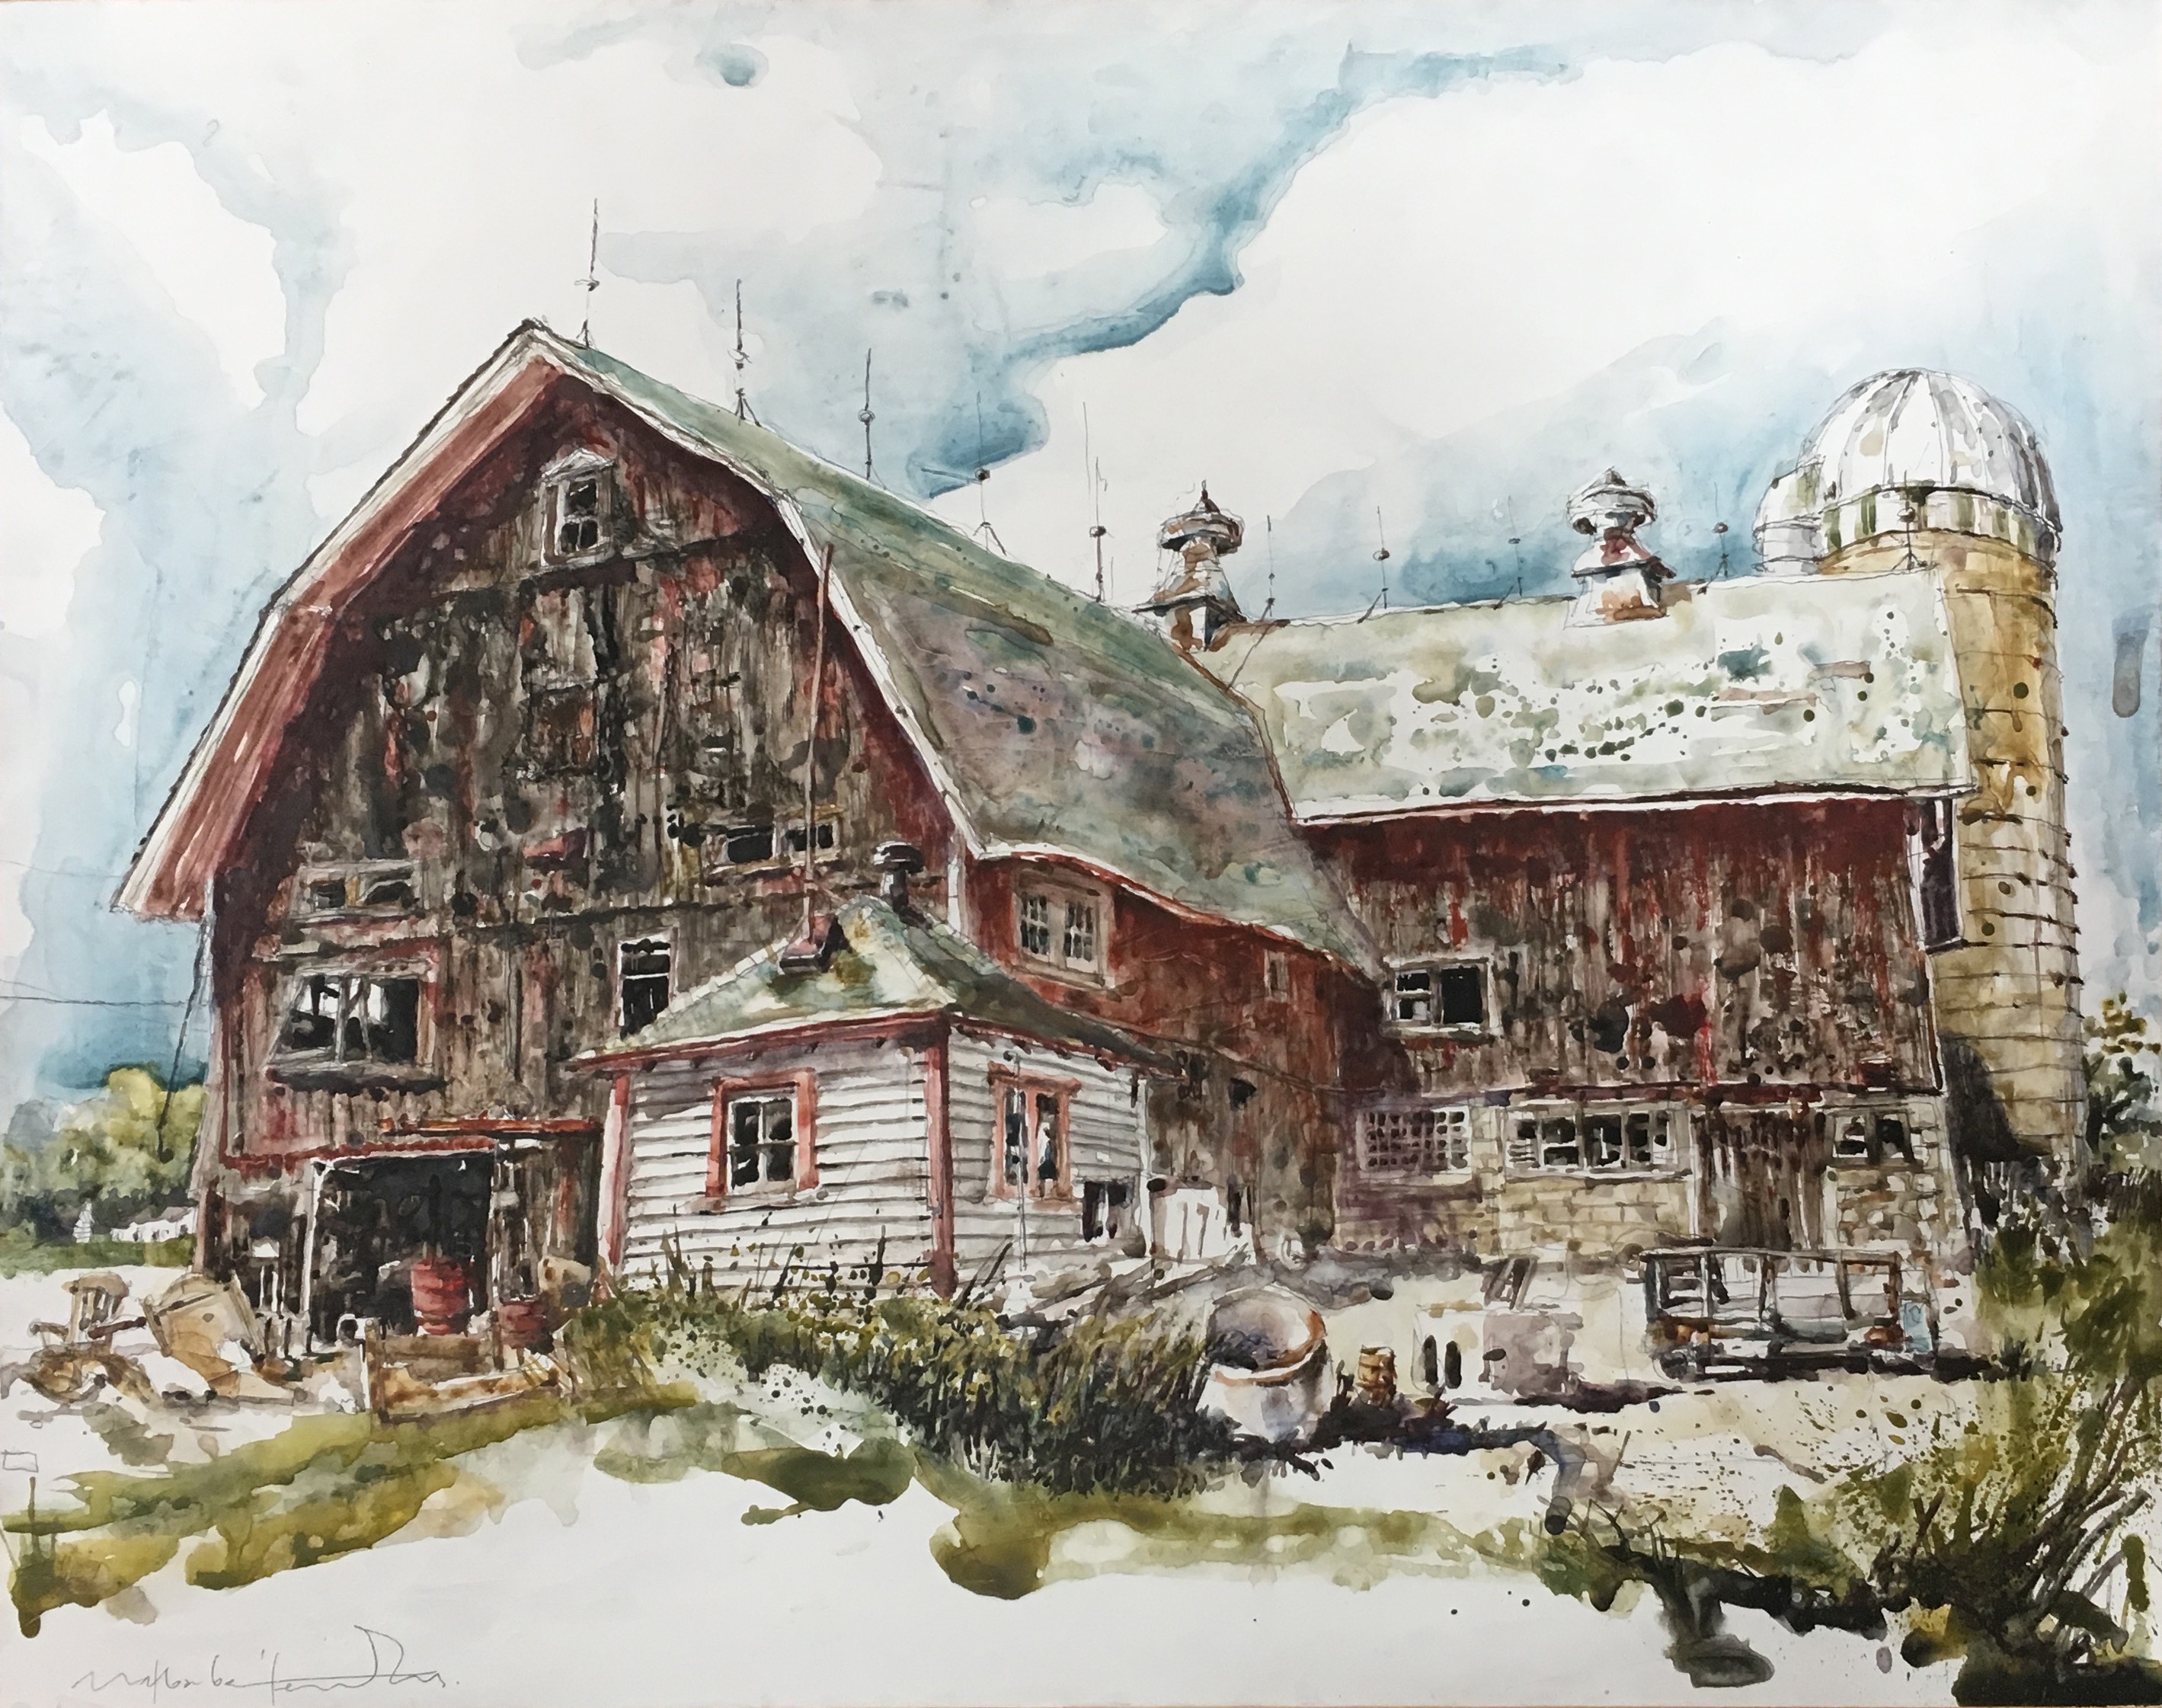 https://americanwatercolor.net/wp-content/uploads/2018/08/3.-KENNEDY-red-barn-on-Highland-Road.jpg